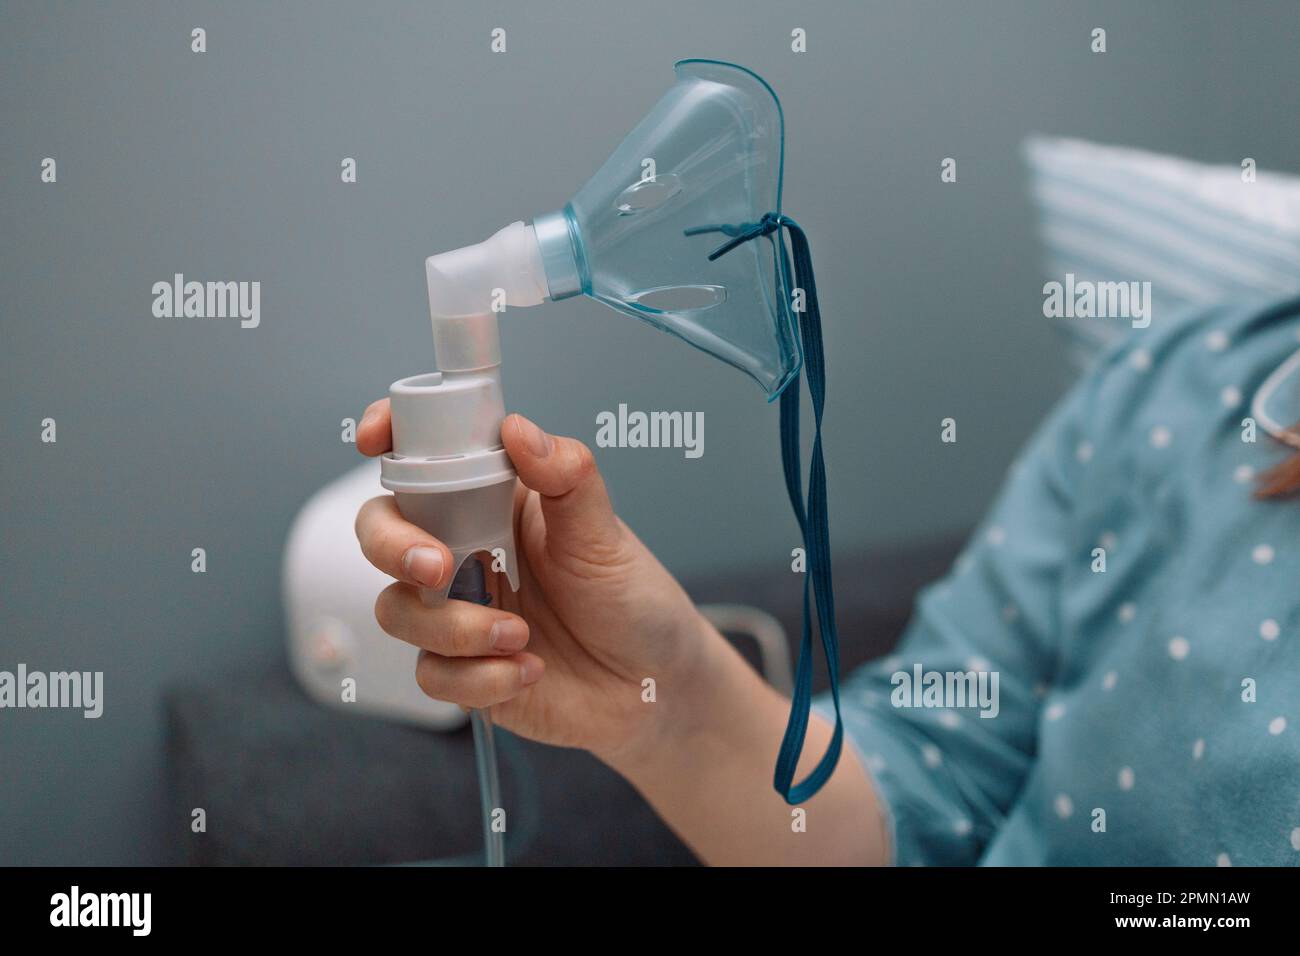 Young sick woman putting on nebulizer mask on face to make inhalation,  using an inhaler at home. Medical inhaler emergency equipment, asthmatic  attack Stock Photo - Alamy